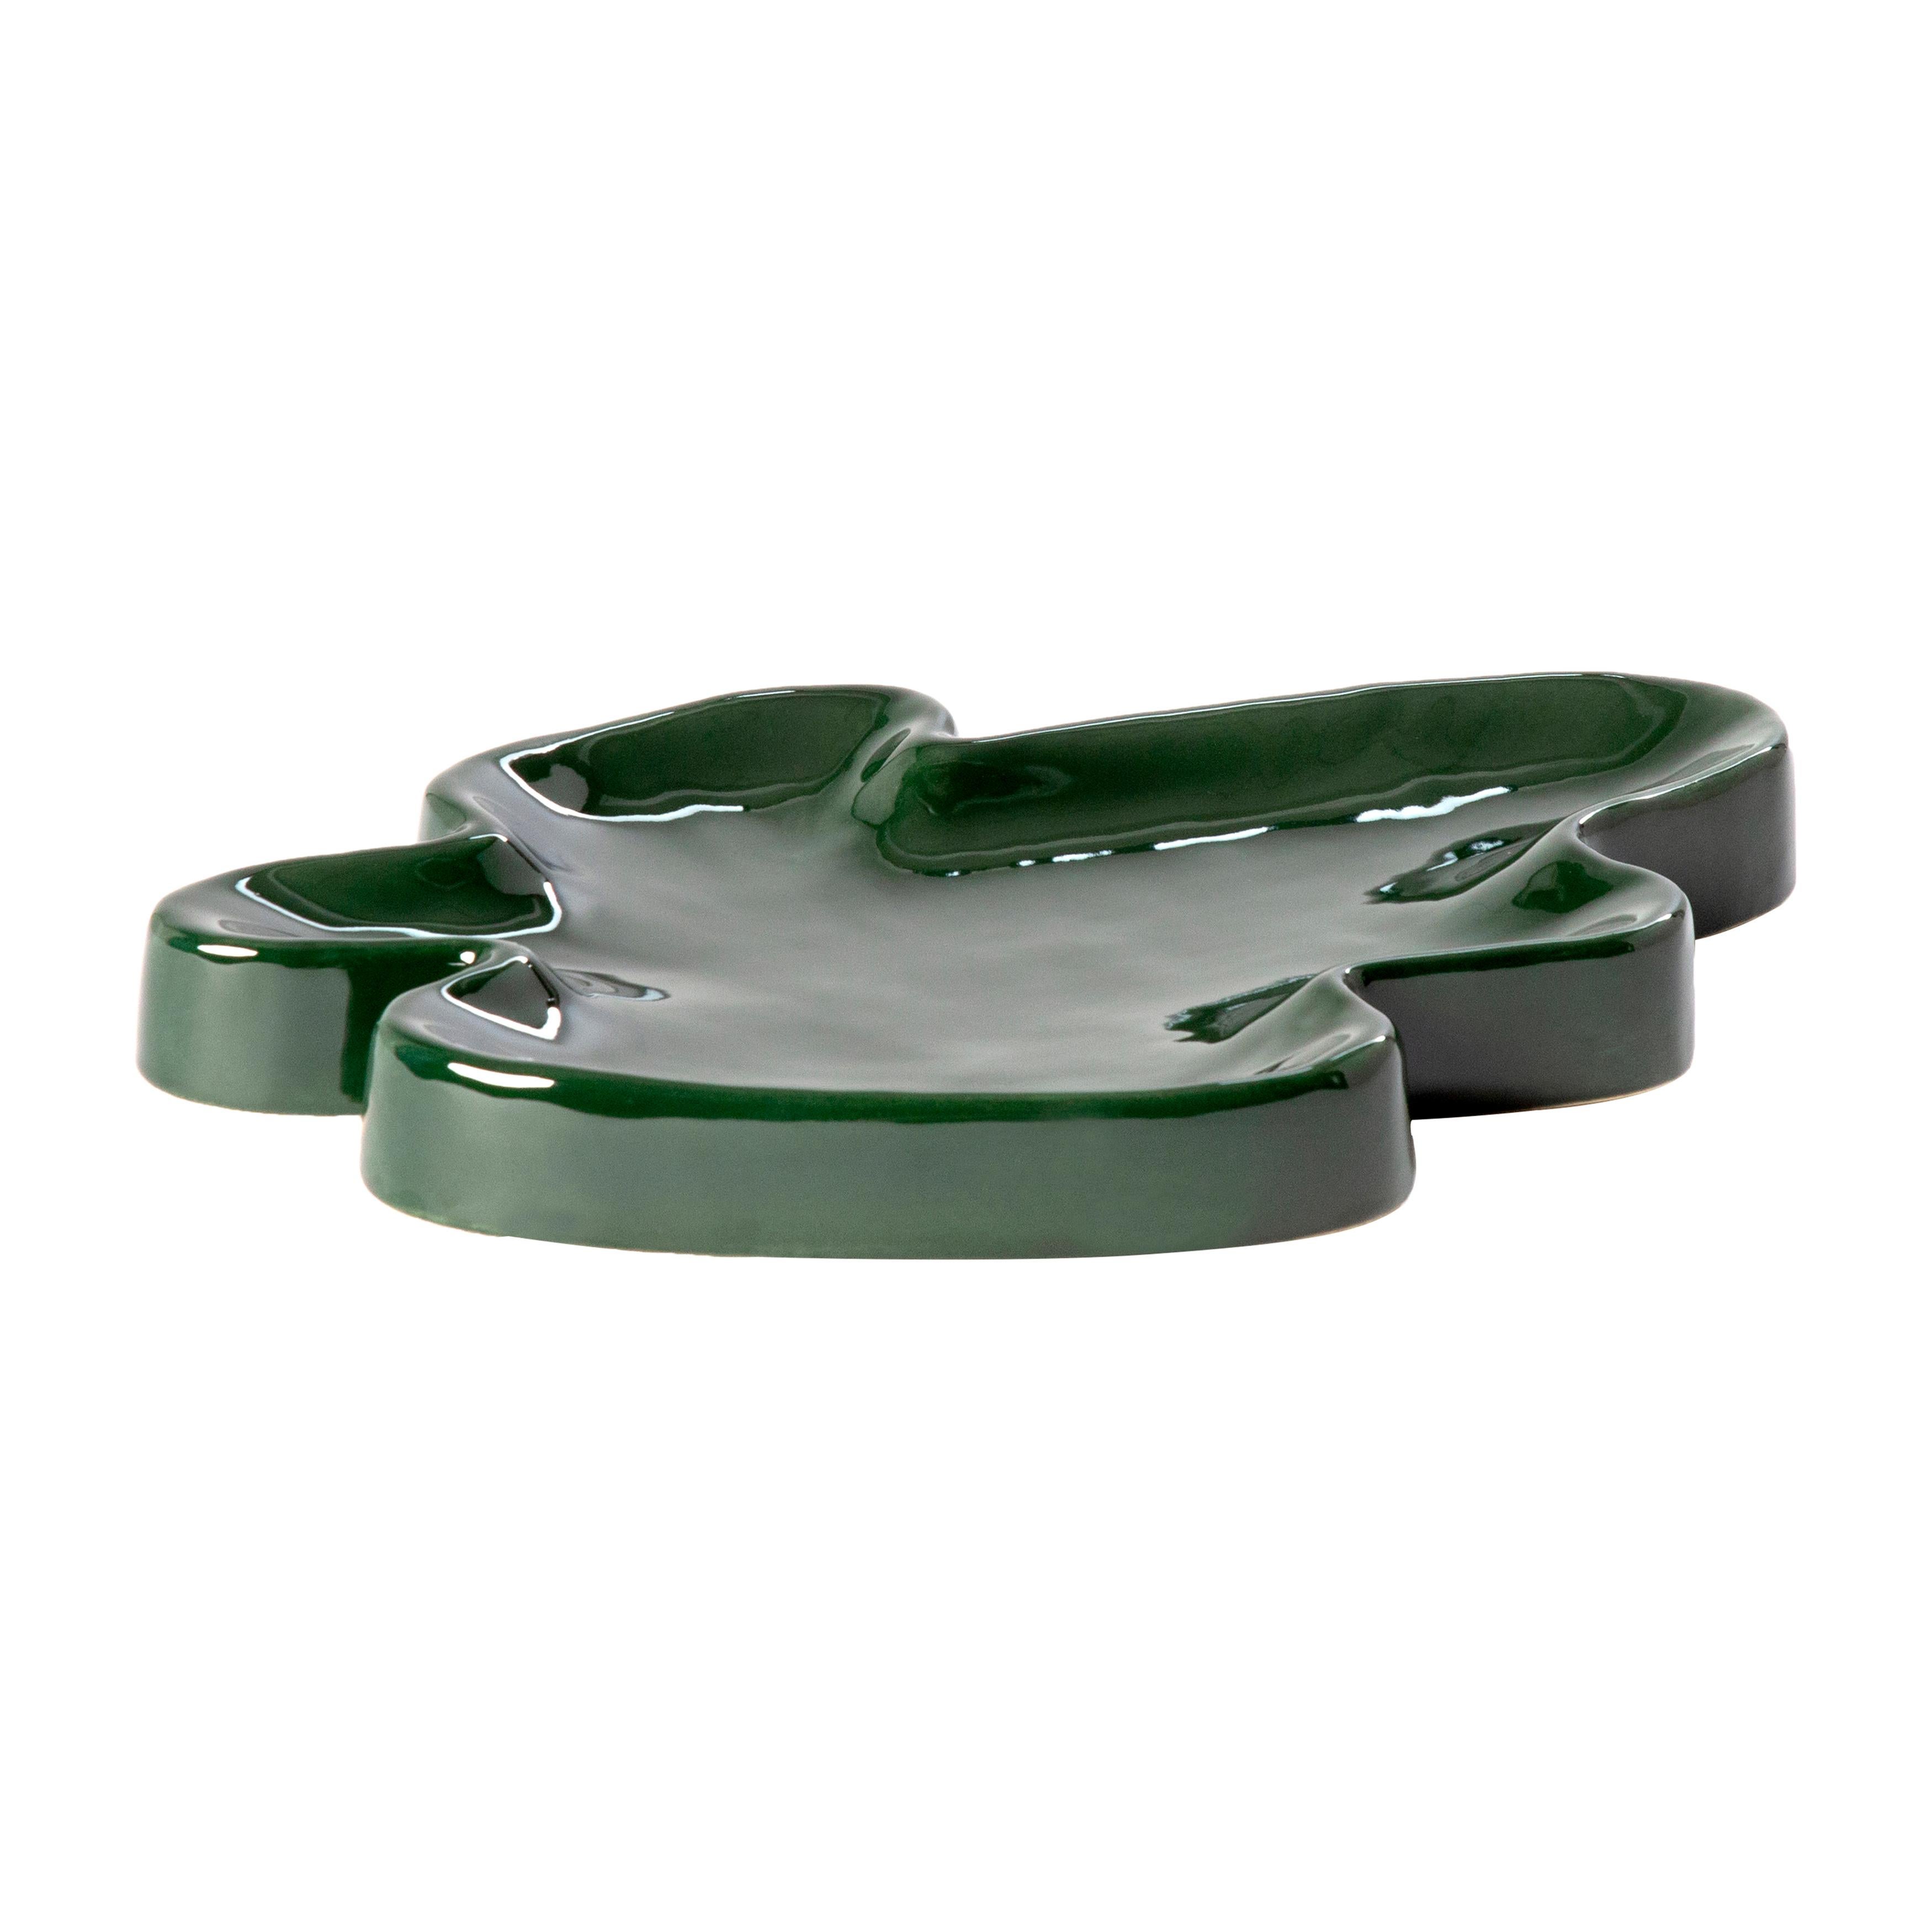 Lake Big Emerald Tray by Pulpo
Dimensions: D41 x W24 x H4 cm.
Materials: ceramic.
Also available in different colors.

These charming additions allow you to create a true tablescape environment, from the tones and textures of the urban landscape to